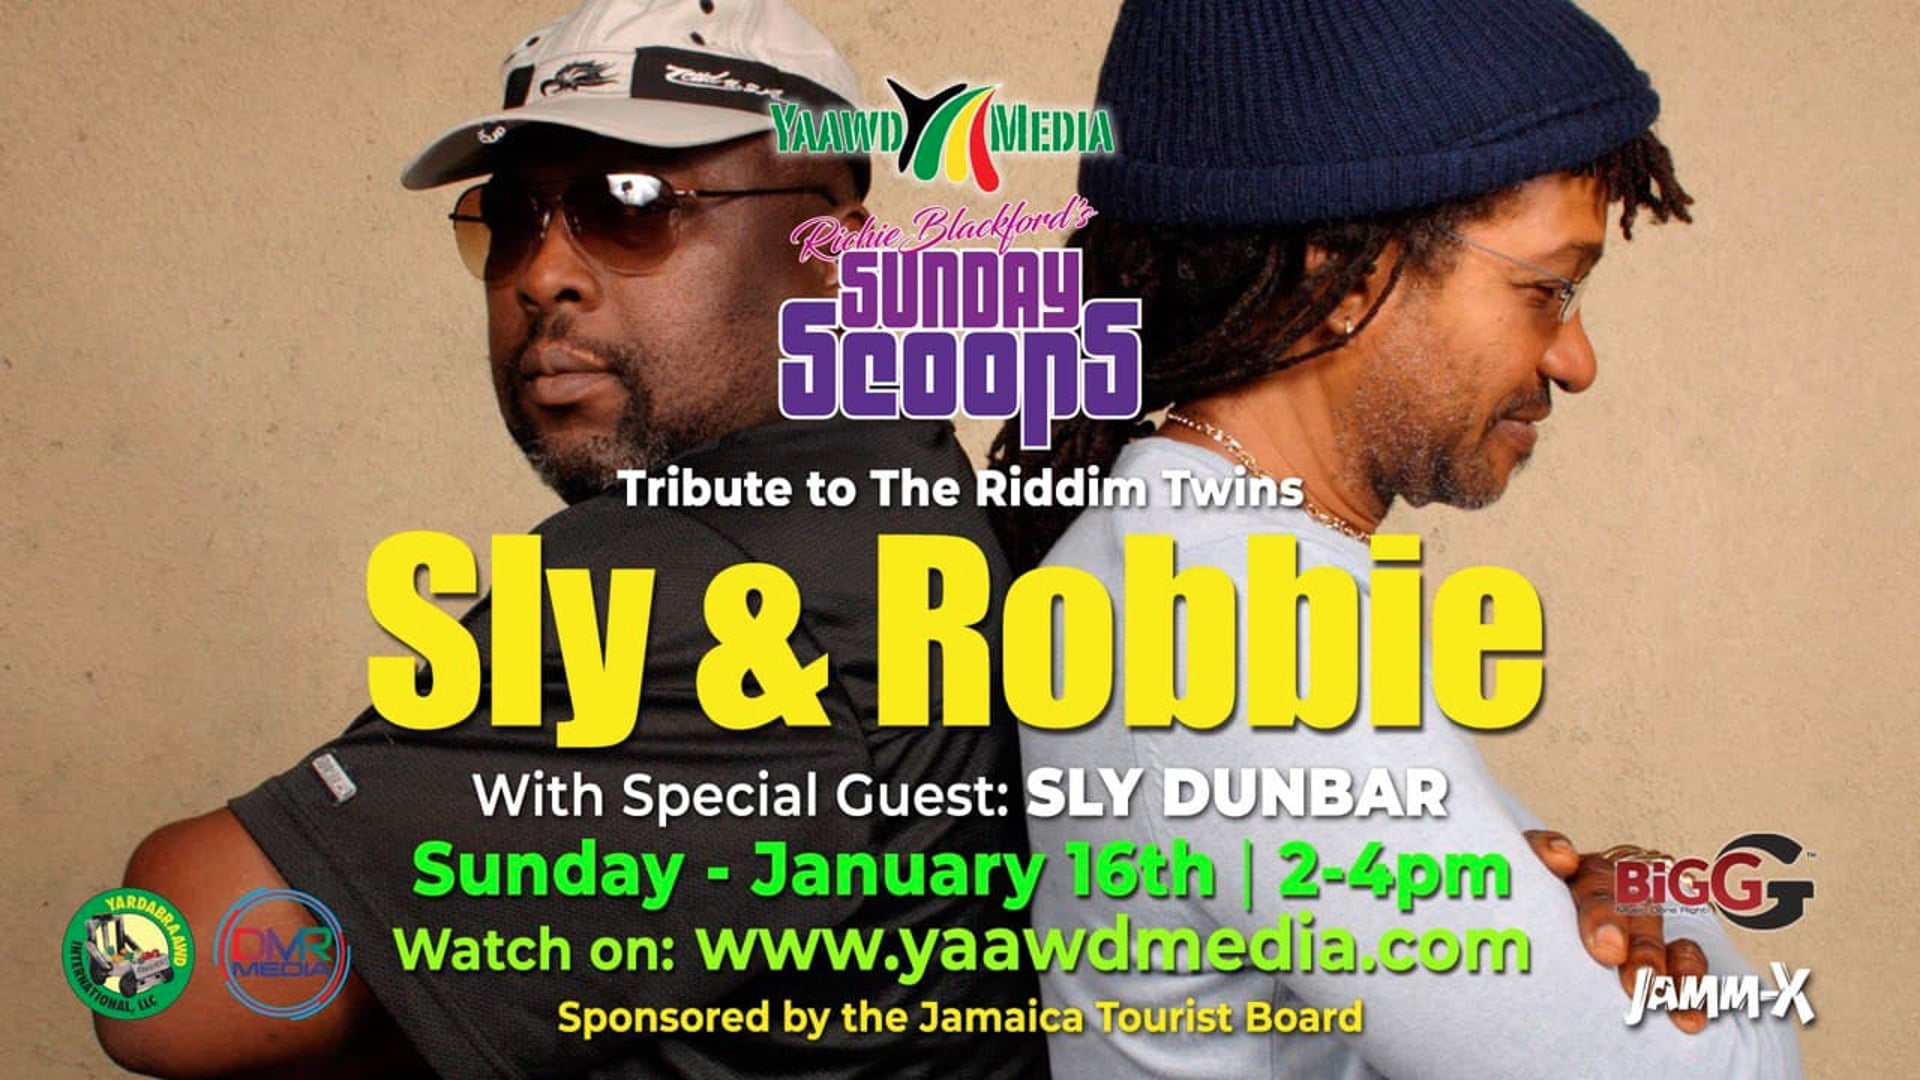 A Sunday Scoops Tribute to the Riddim Twins. Sly & Robbie